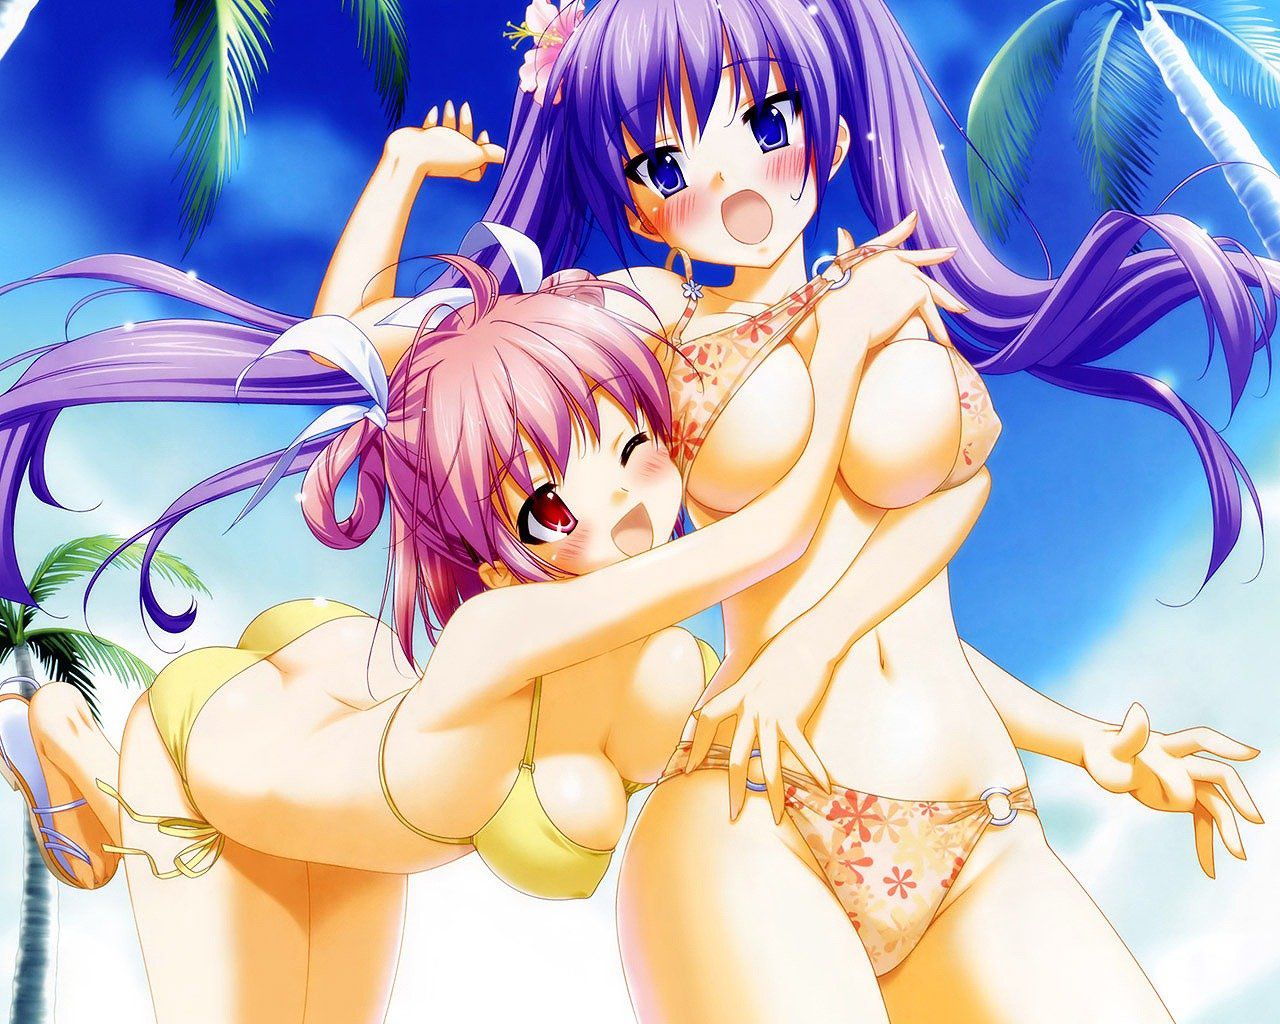 Beautiful girl image of a bikini that can enjoy a fascinating body [secondary swimsuit] Part2 19